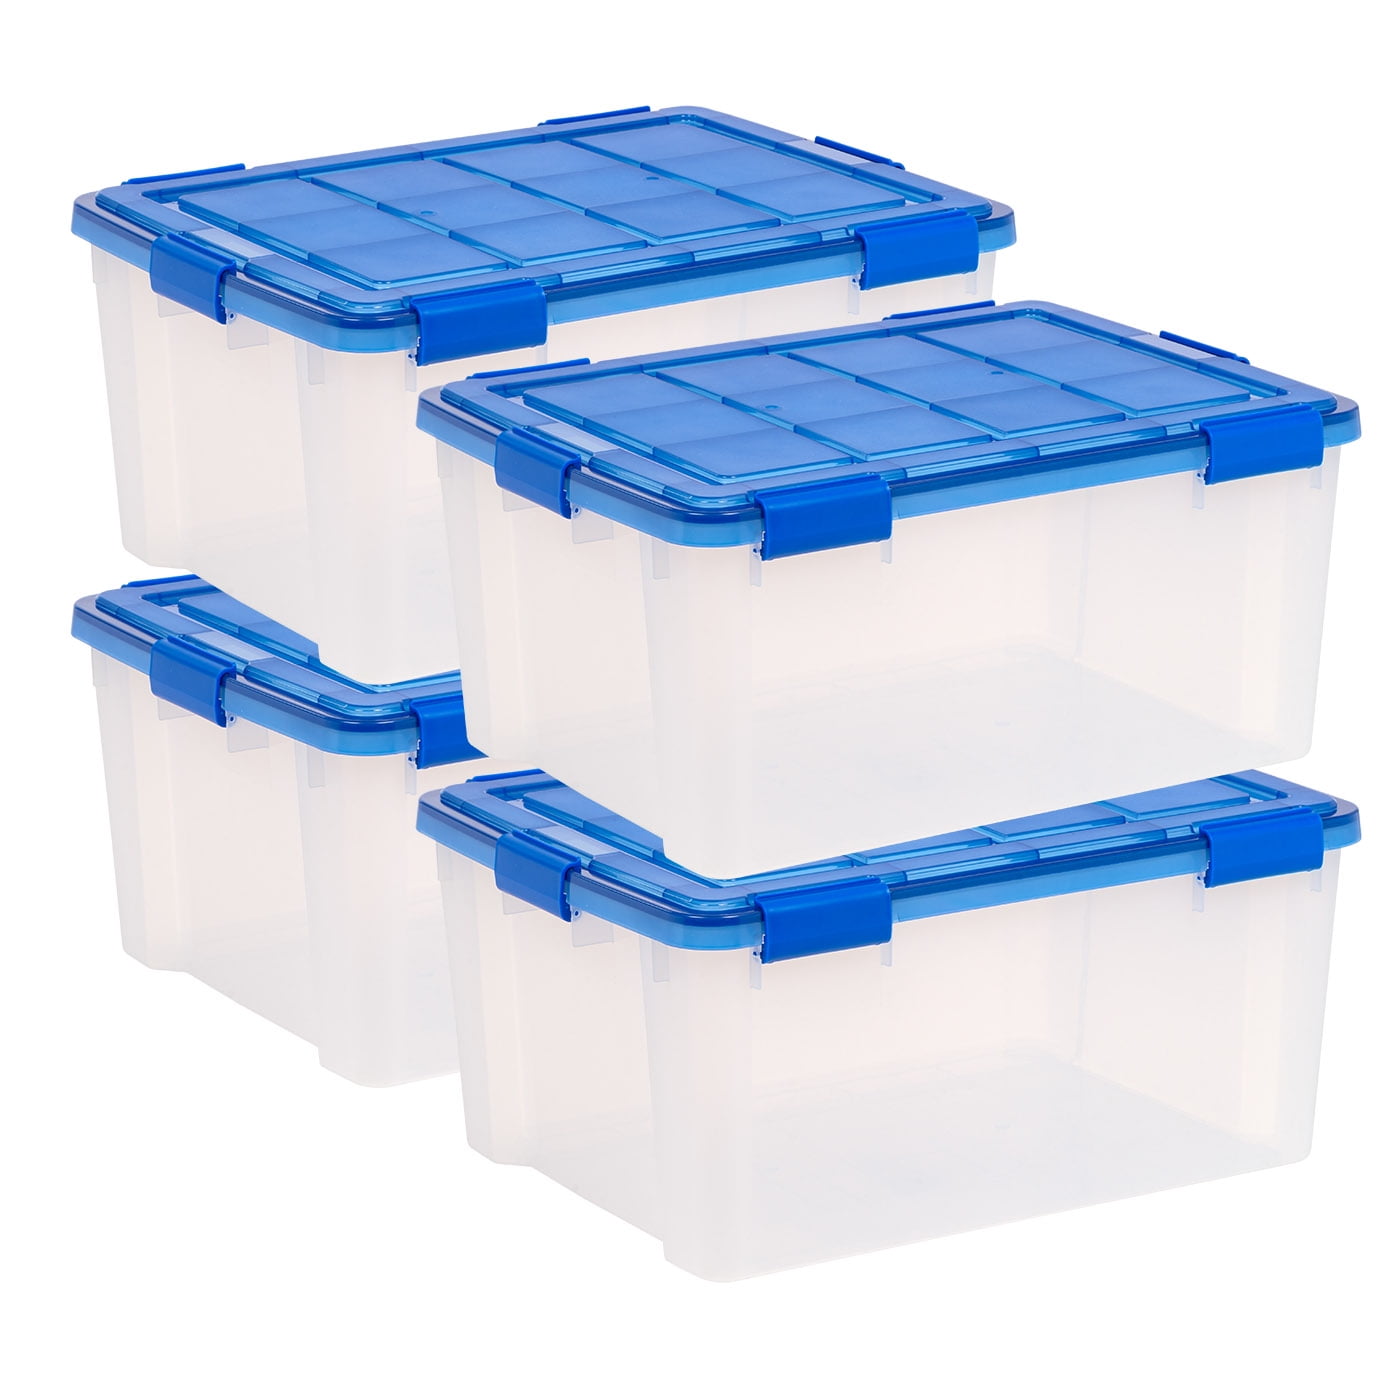 Case box*600x400x435 Transport Container 60x40x43,5 with Handle and Lid Box 